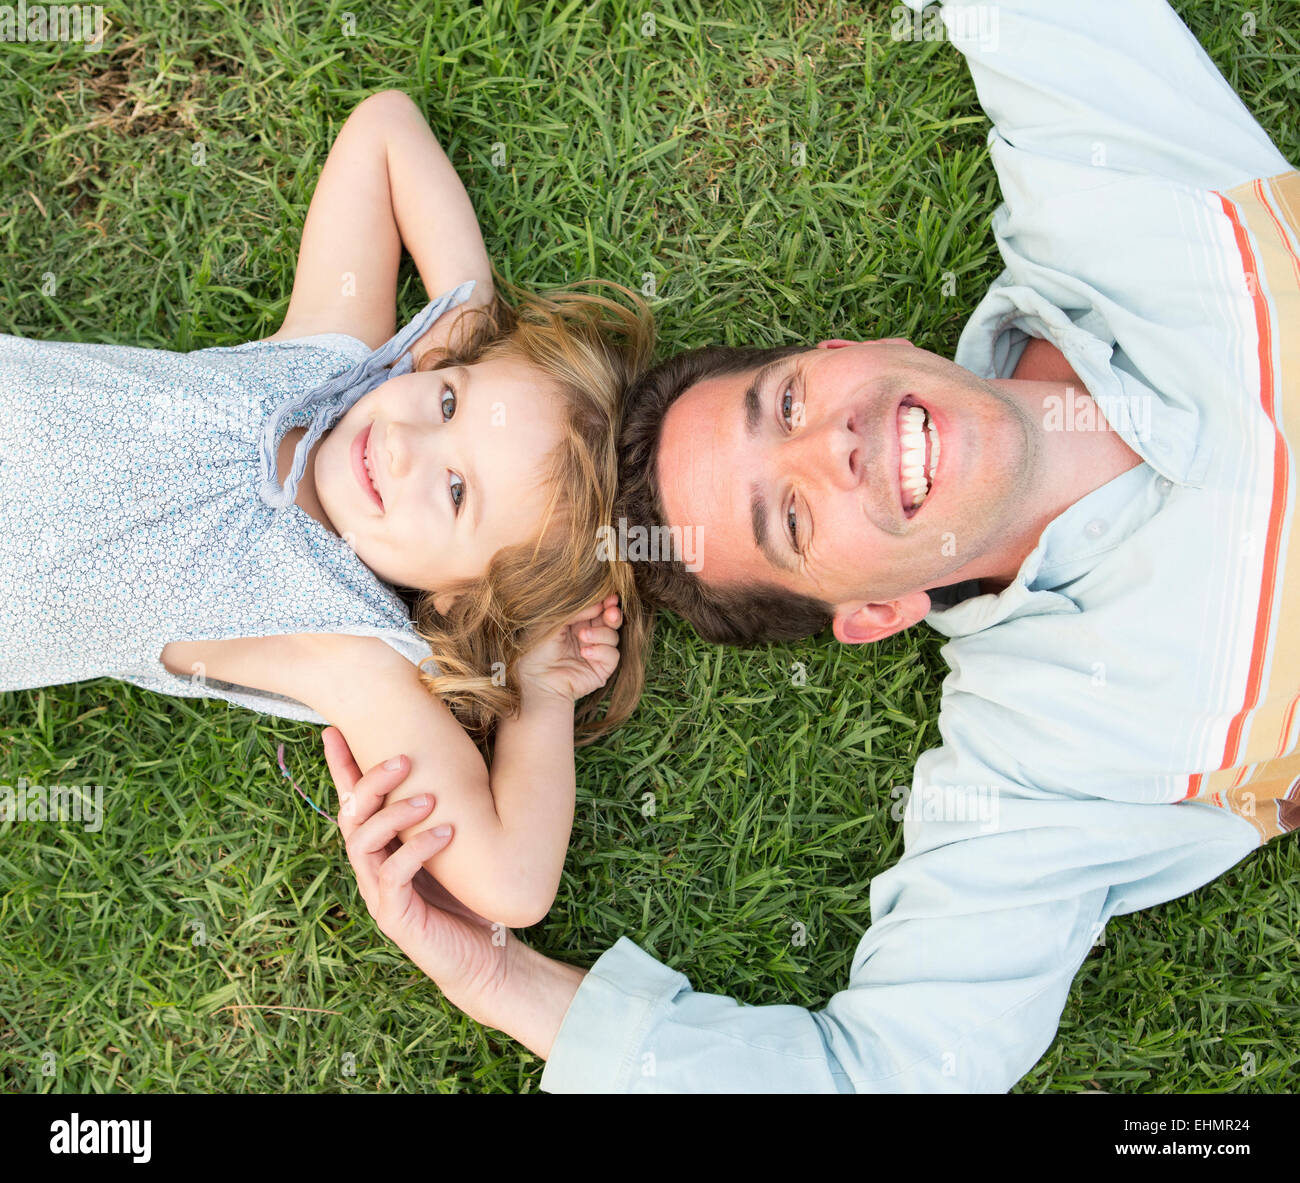 Caucasian father and daughter laying on grass Stock Photo